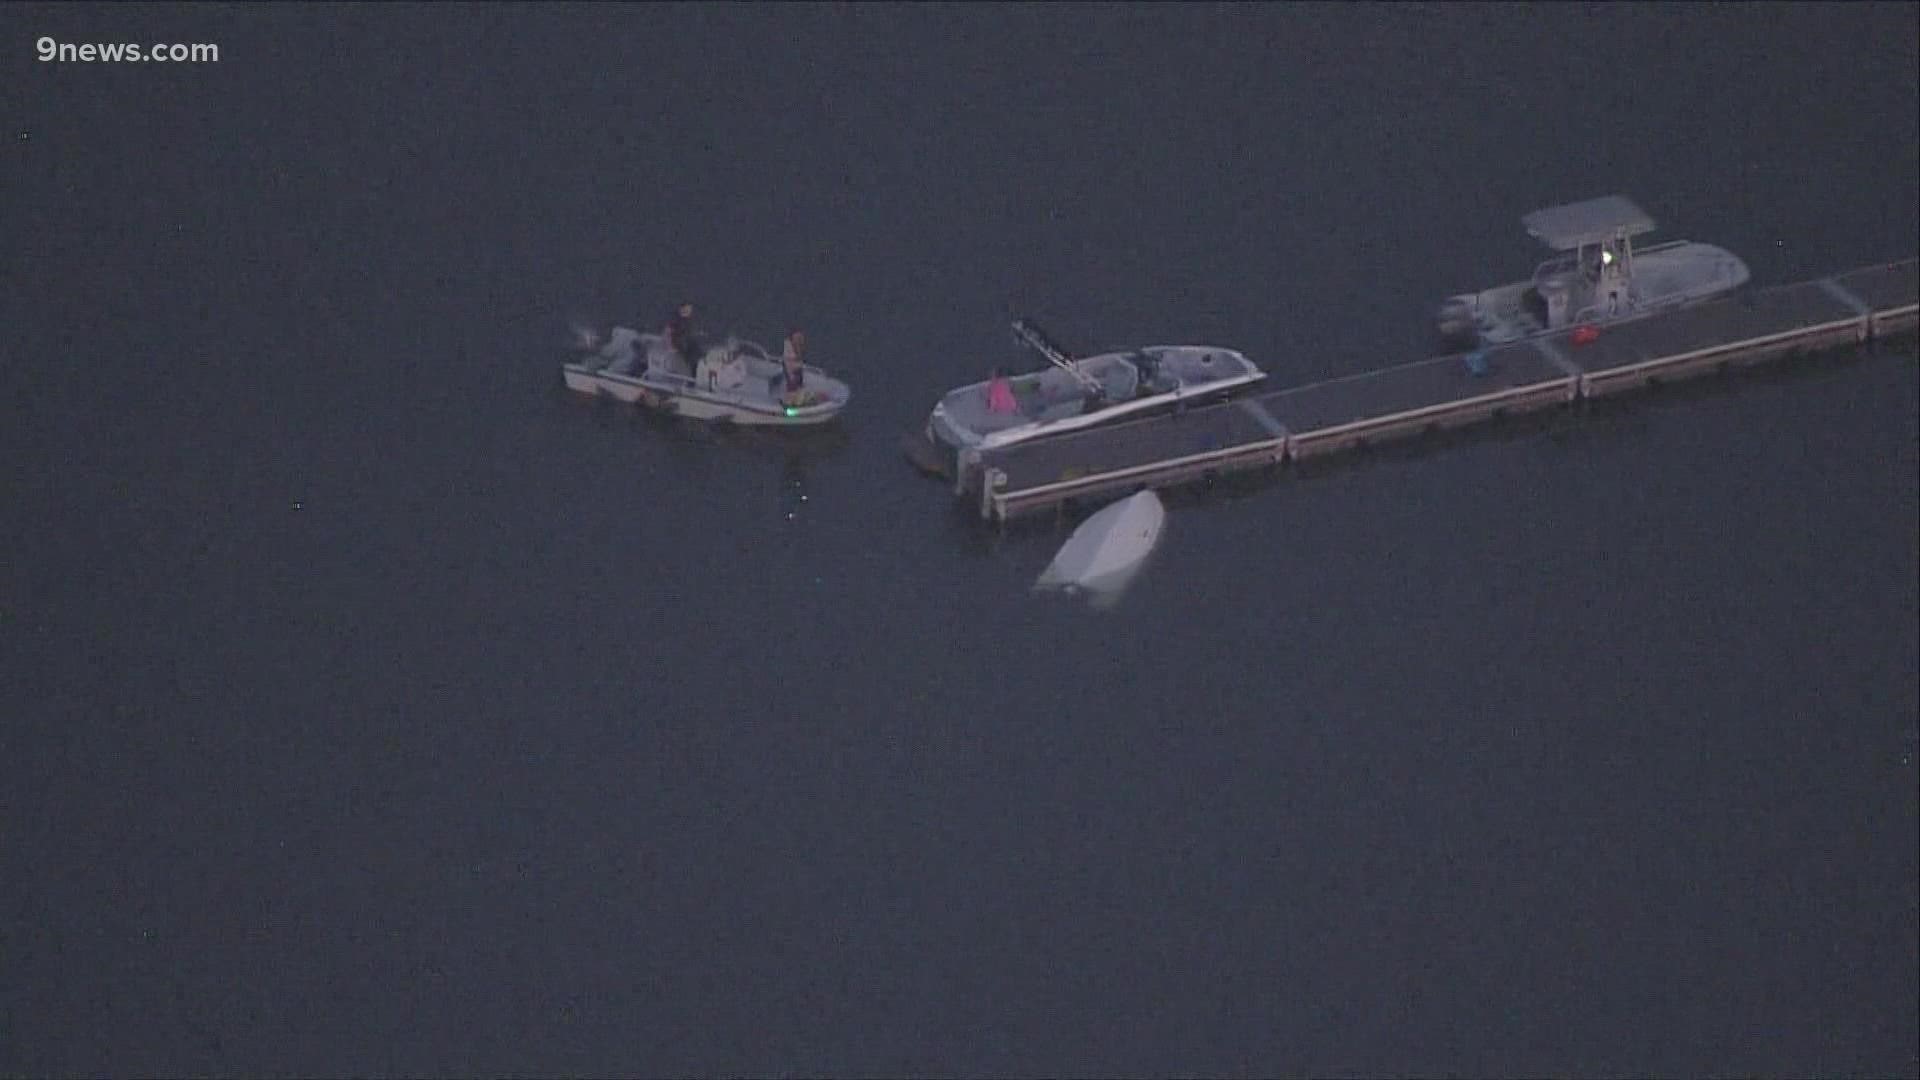 South Metro said 10 people were in the water after a boat capsized on Sunday.